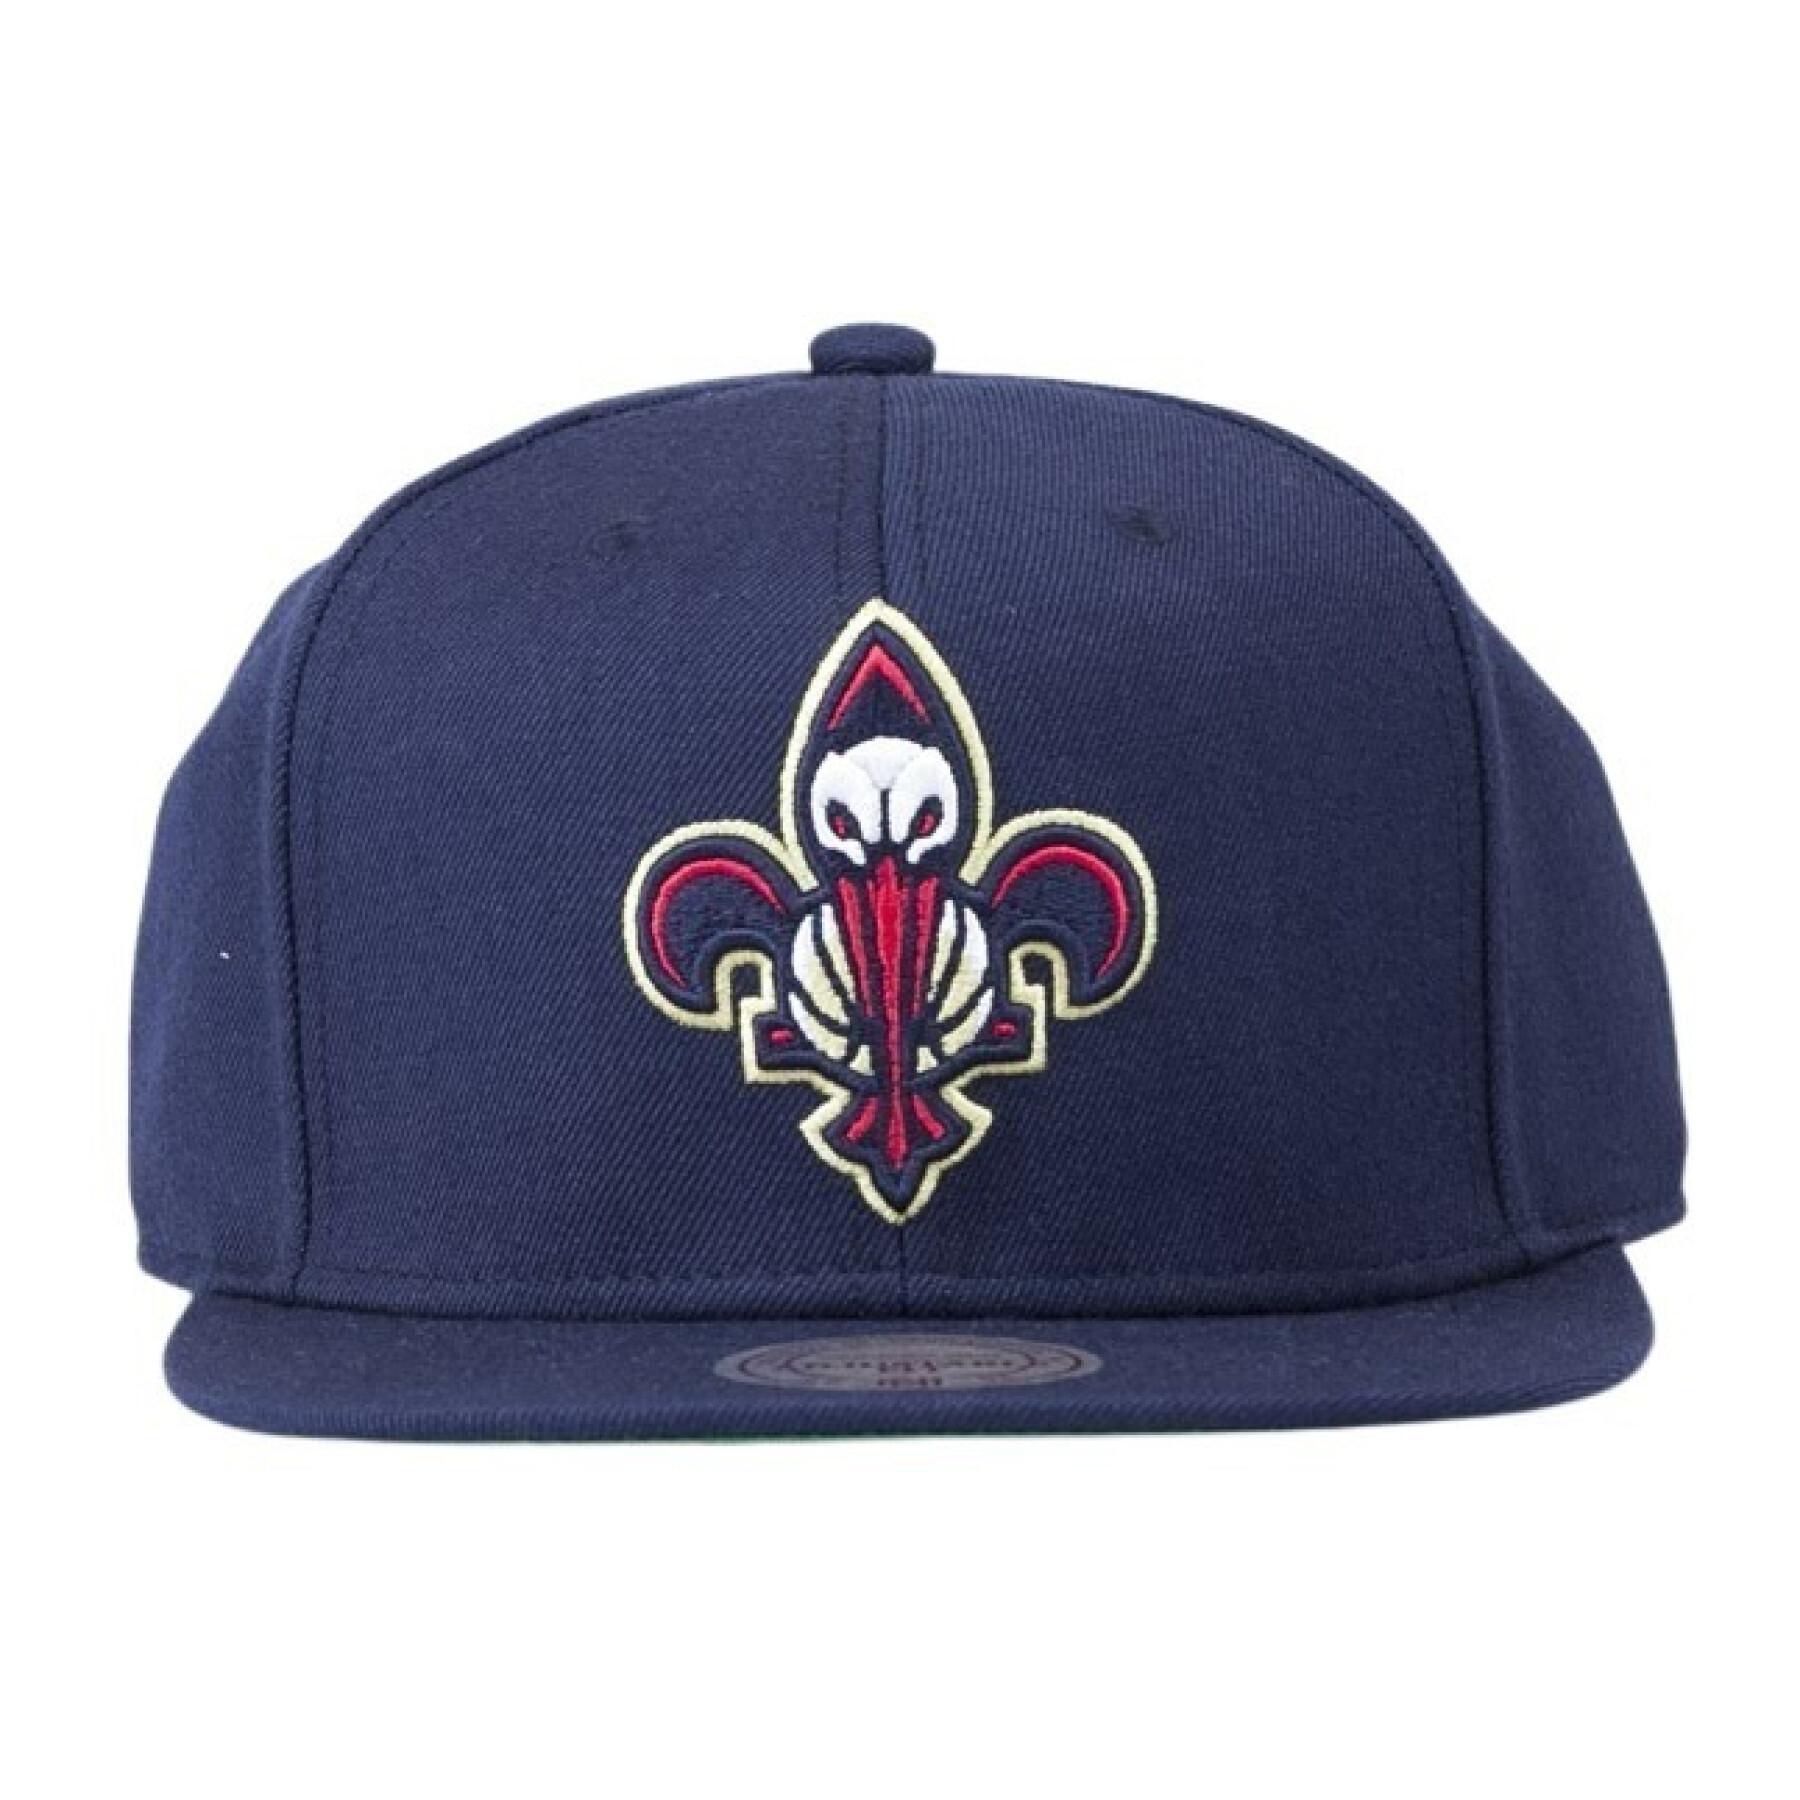 Cap New Orleans Pelicans wool solid 2 current